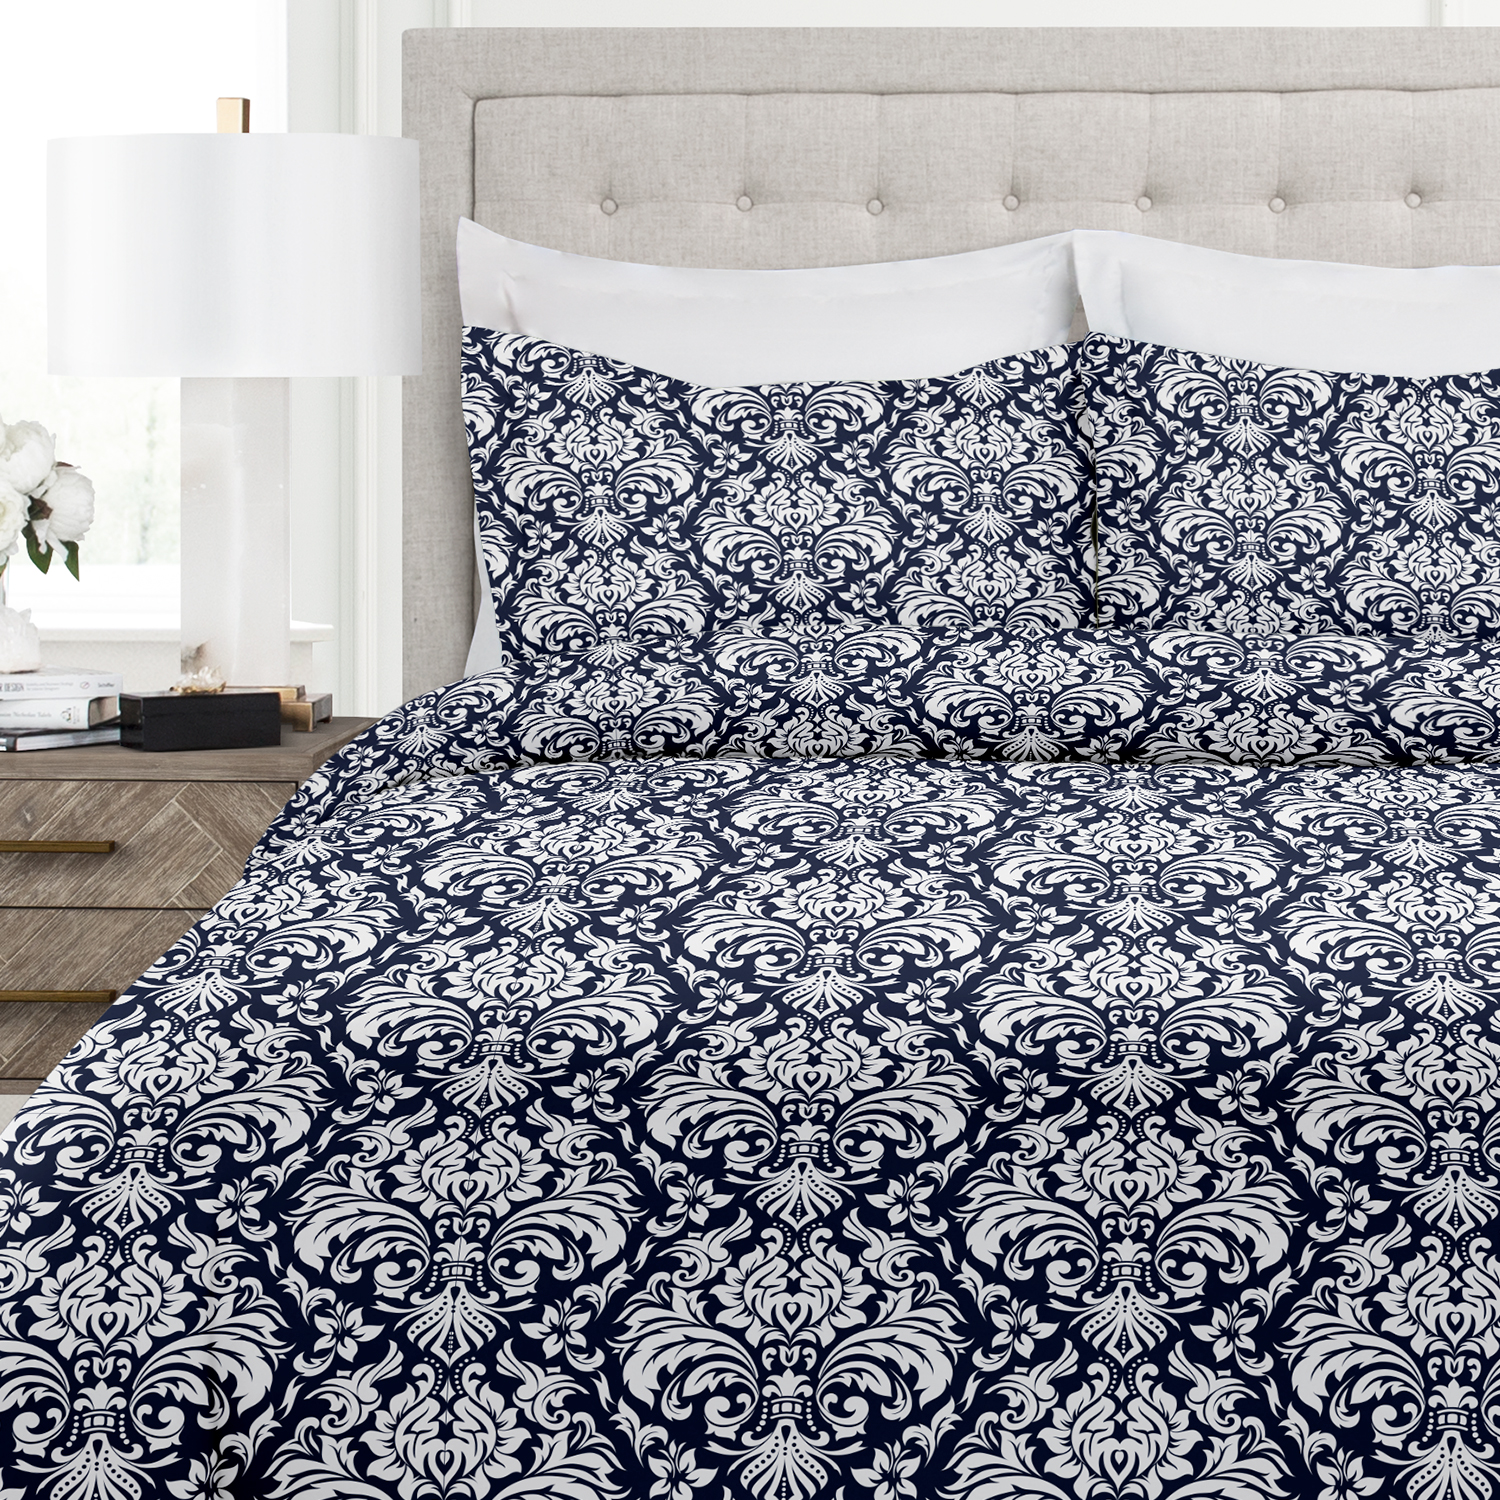 Linen's & Hutch Damask Patterned Duvet Cover + 2 Matching Shams (Available in 3 Sizes & 6 Colors) Starting at $25.59 + FS